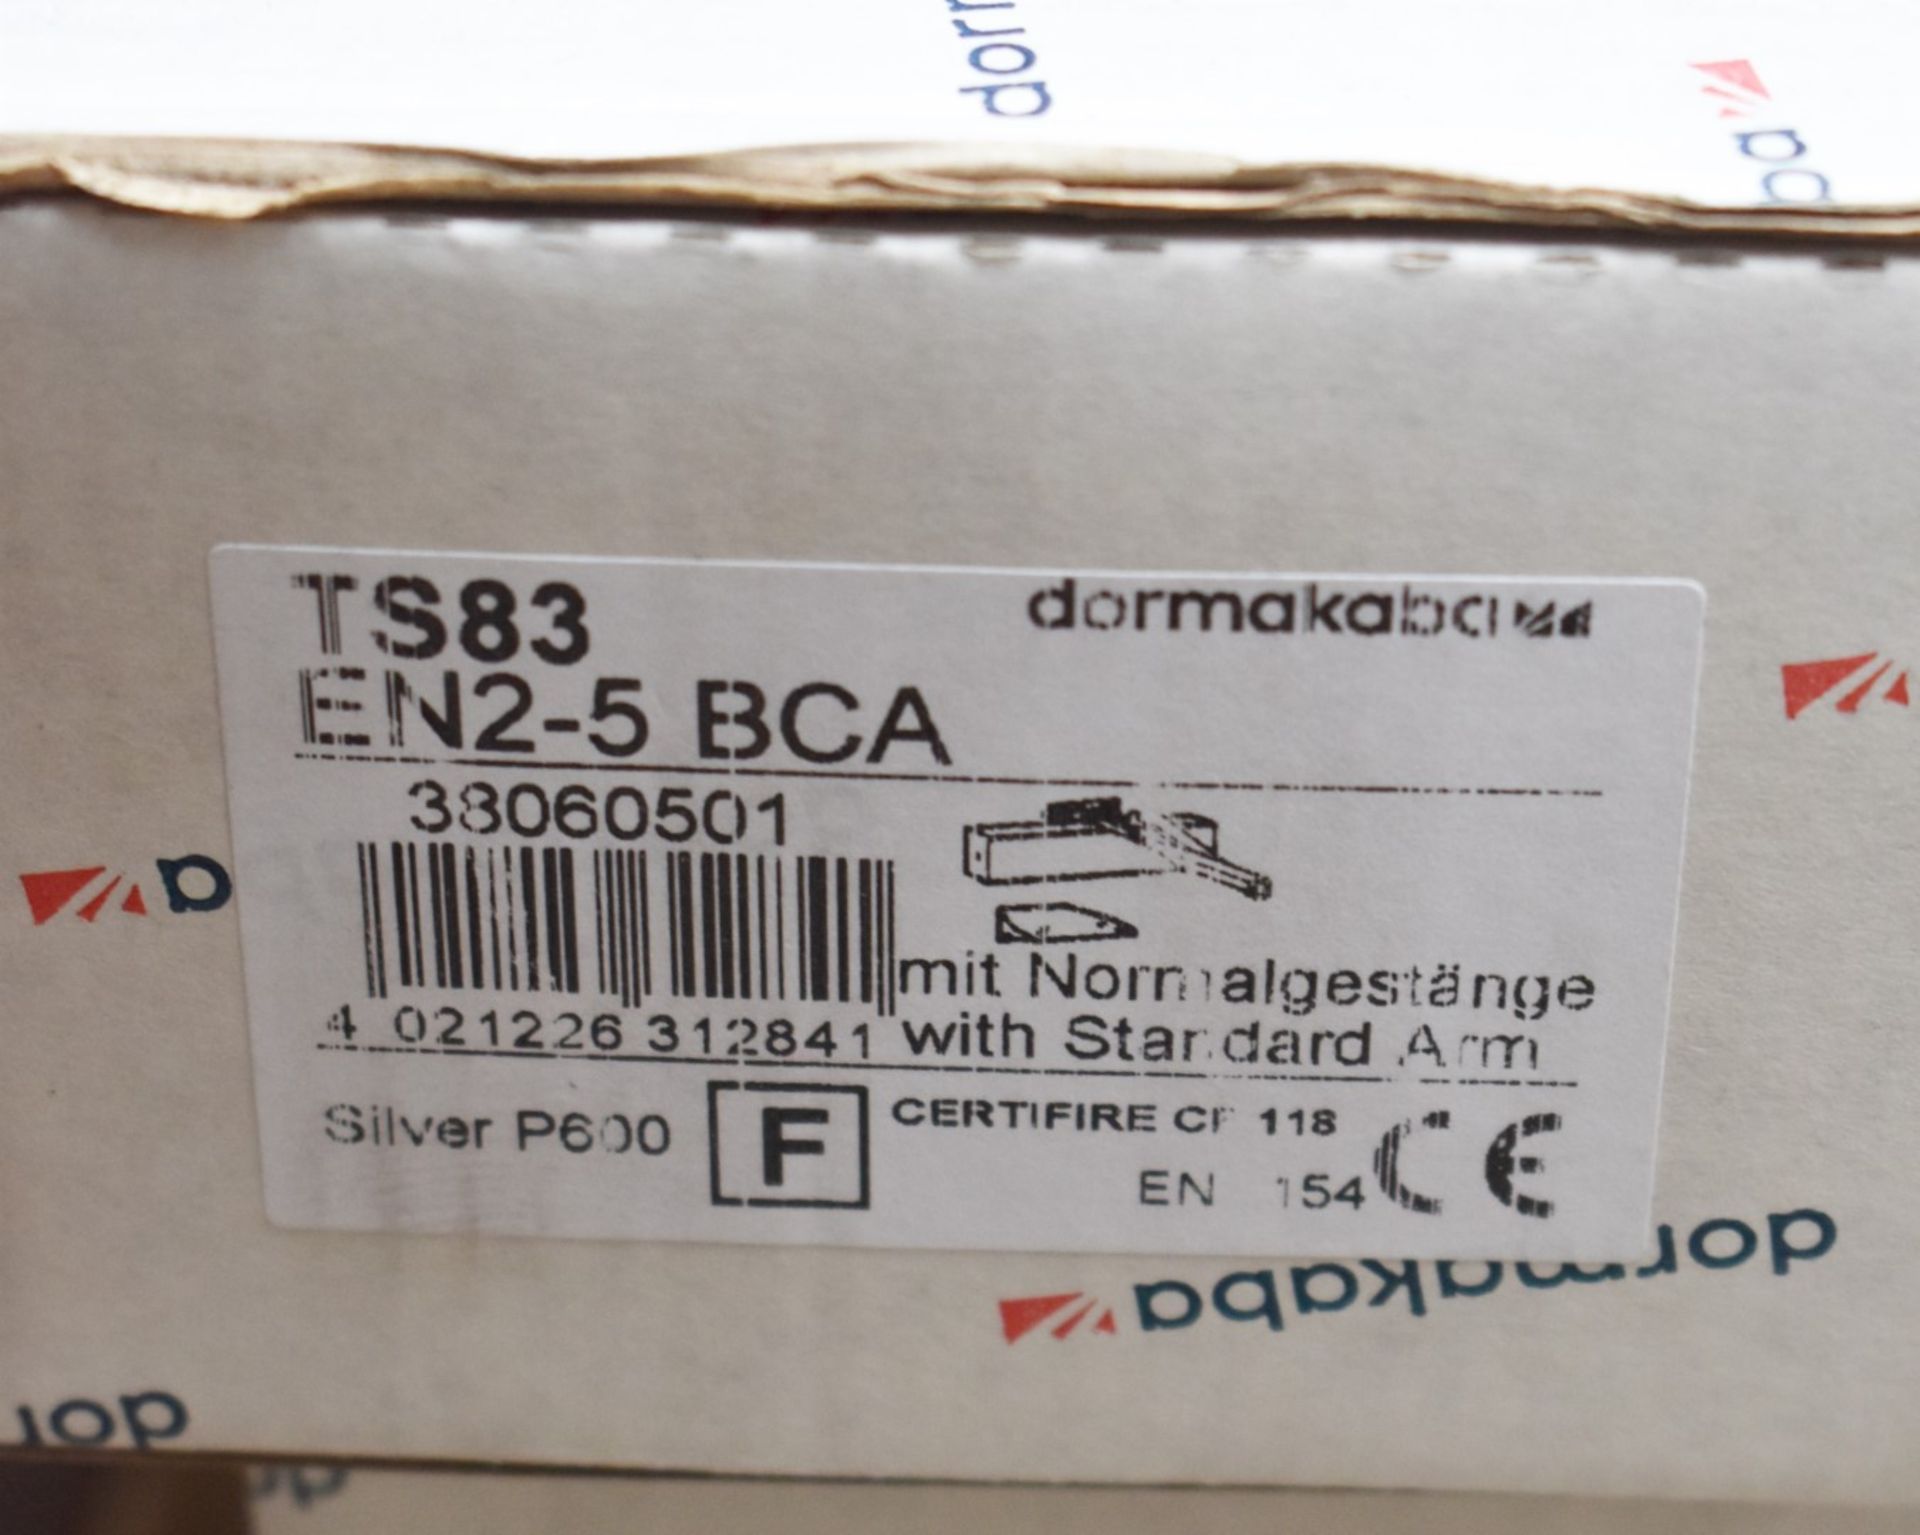 1 x Dorma TS83 Soft Door Closer - Silver Finish - Size 2-5  - Brand New Stock - RRP £108 - Product - Image 2 of 2